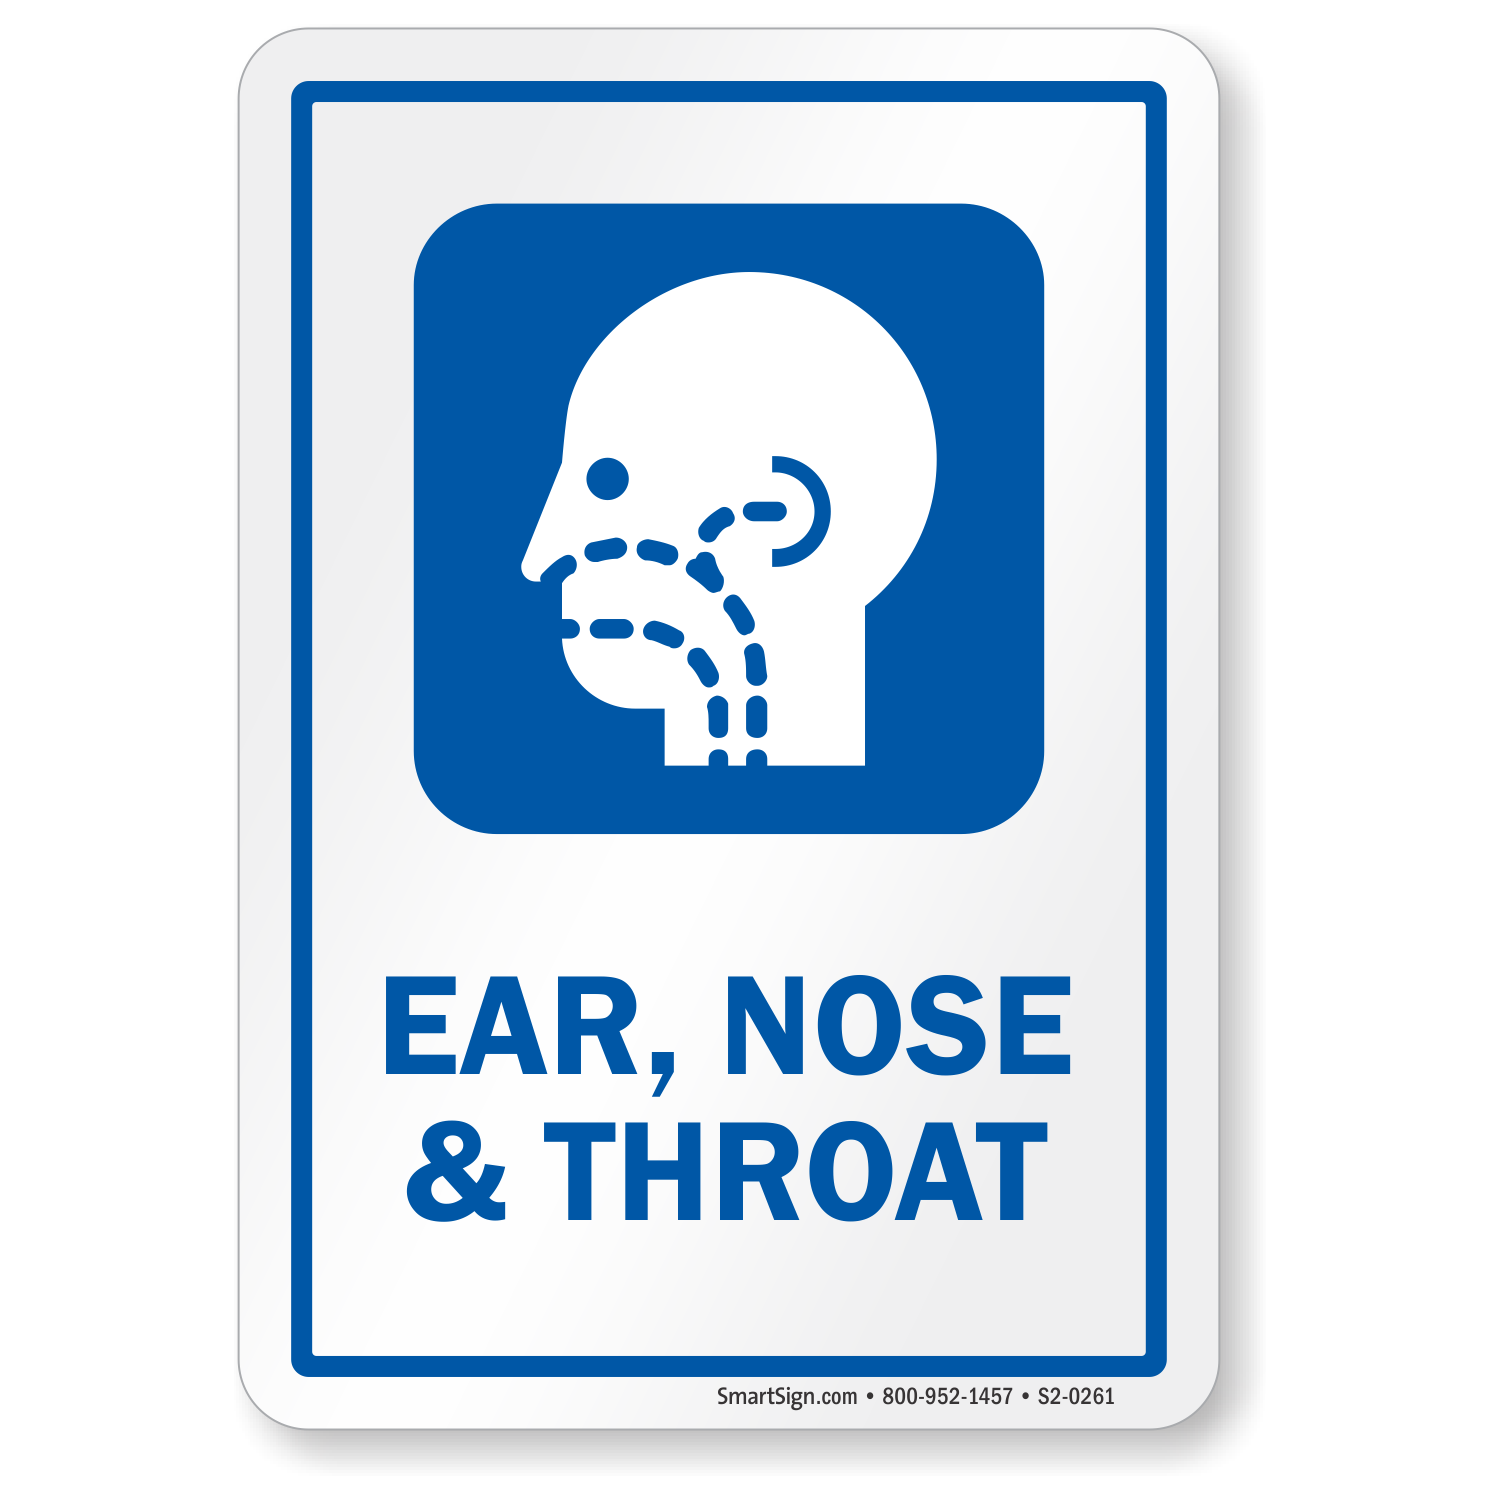 Ear Nose and Throat Sign for Hospitals, SKU: S2-0261